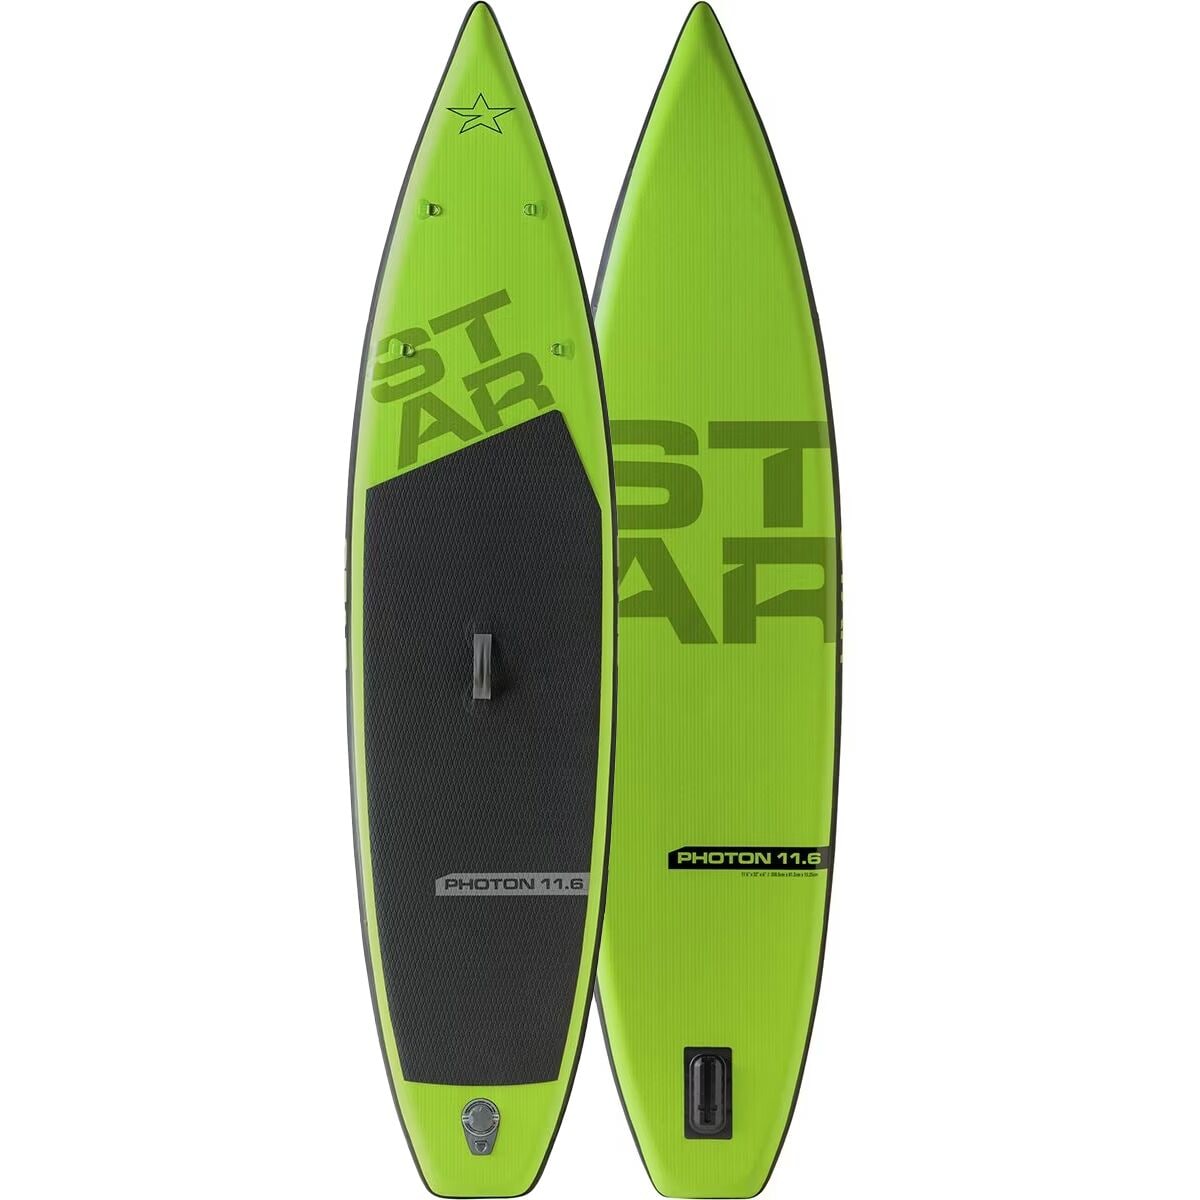 Star Photon Inflatable Stand-Up Paddleboard